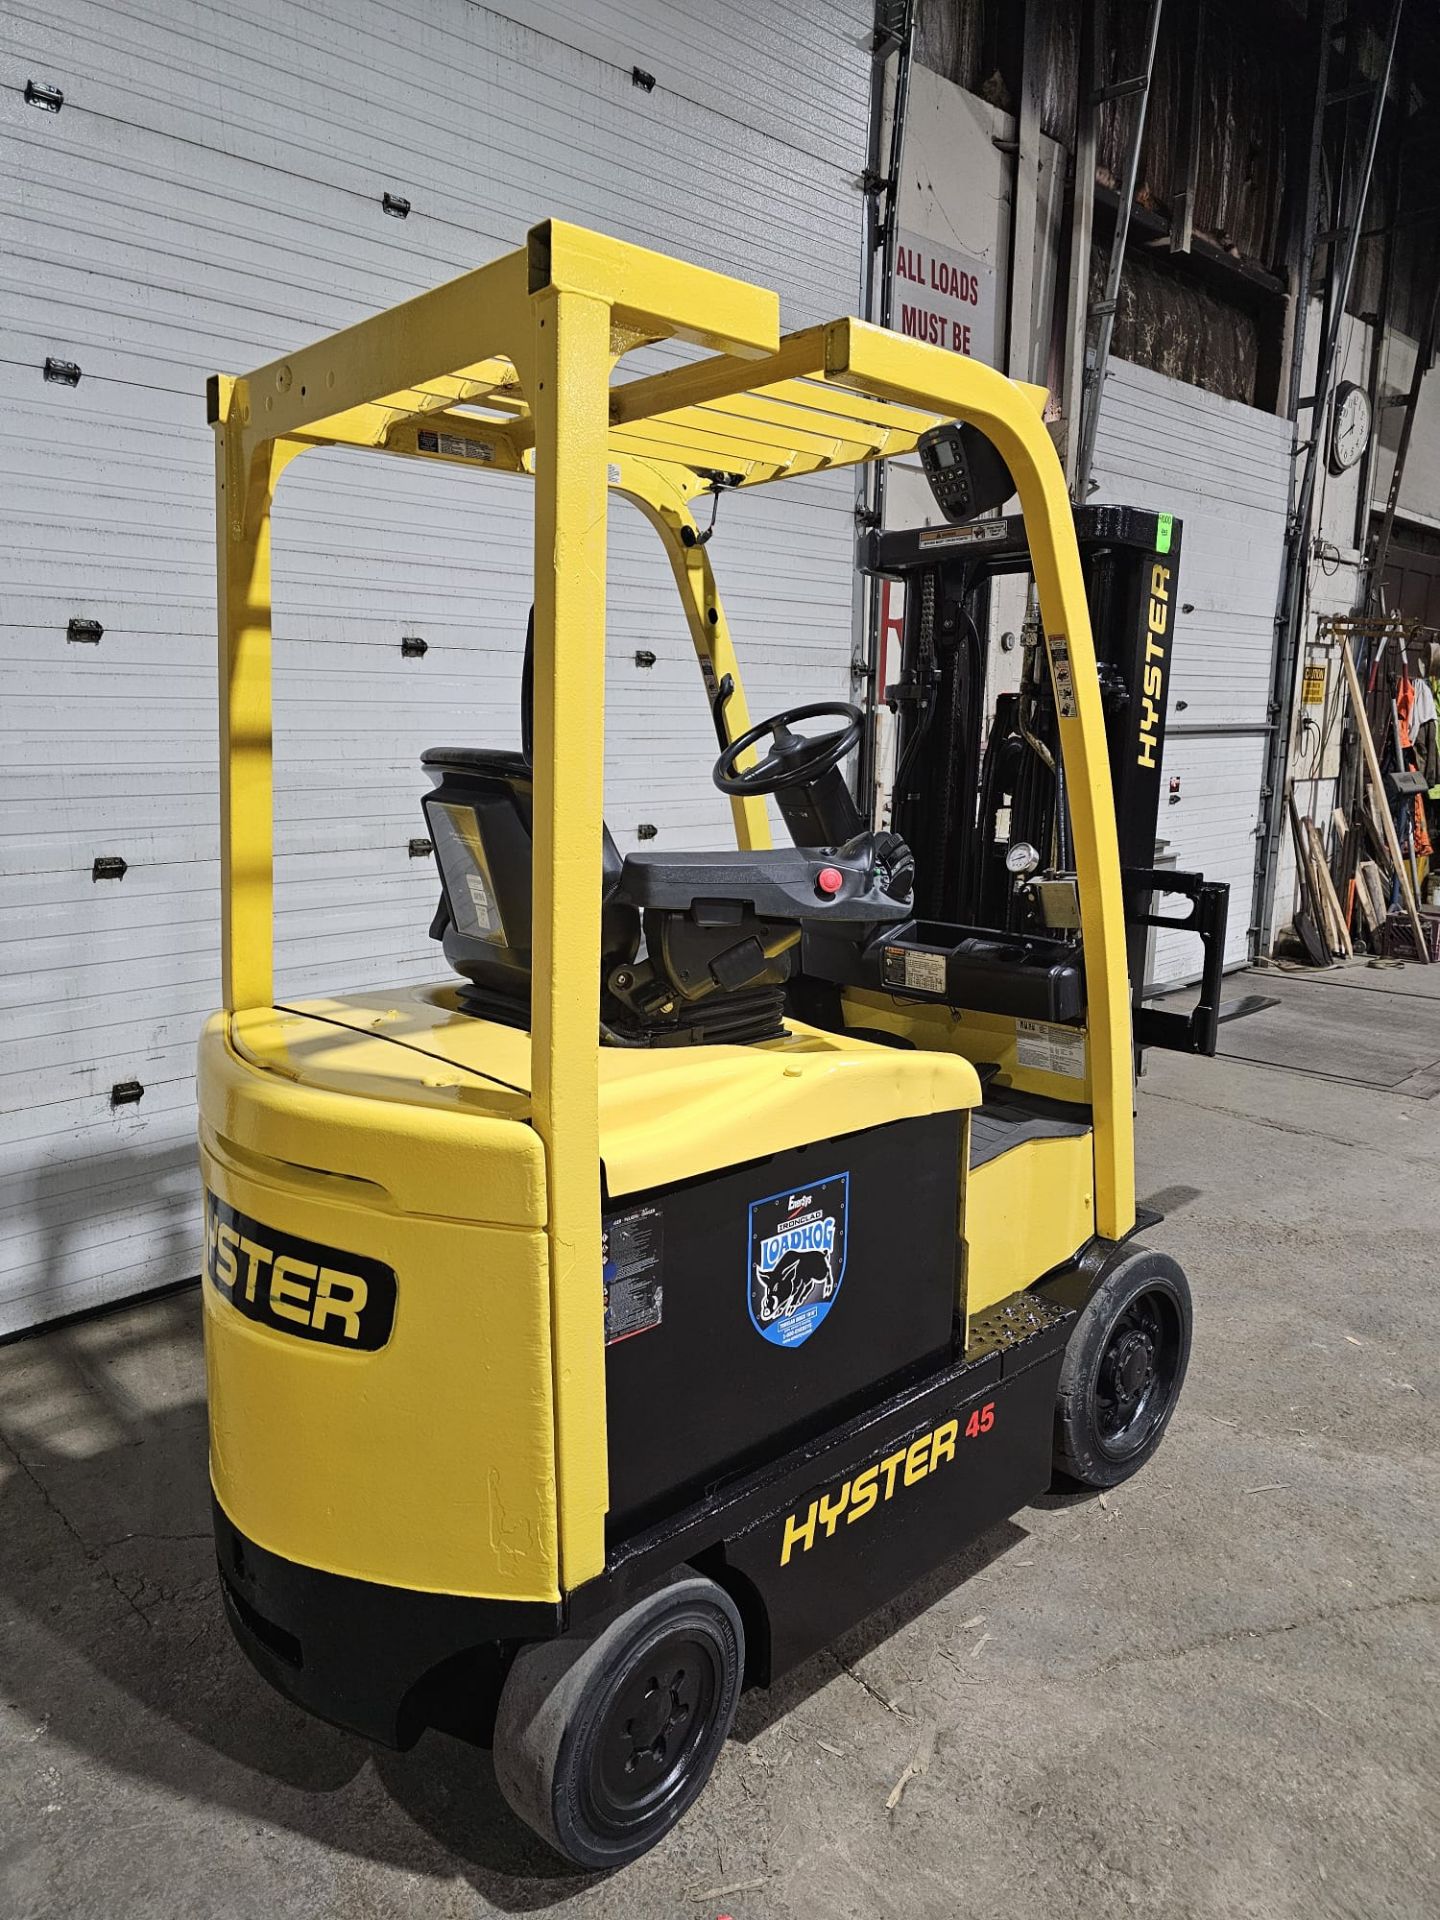 2010 Hyster 4,500lbs Capacity Electric Forklift 48v sideshift 3-STAGE MAST 189" load height - Image 4 of 11